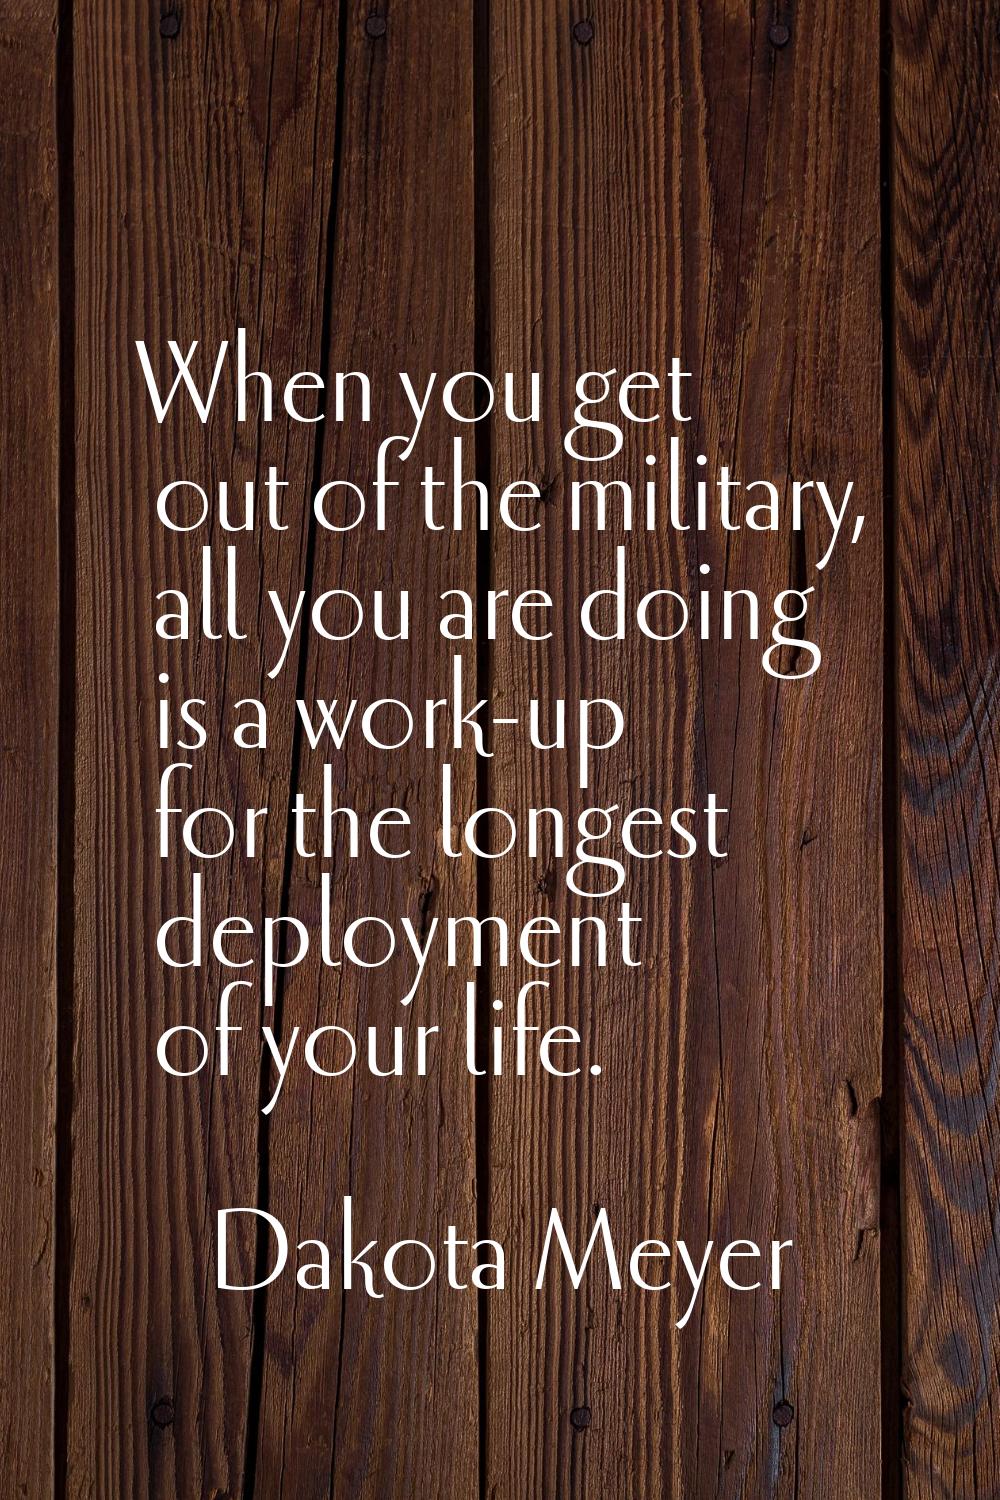 When you get out of the military, all you are doing is a work-up for the longest deployment of your